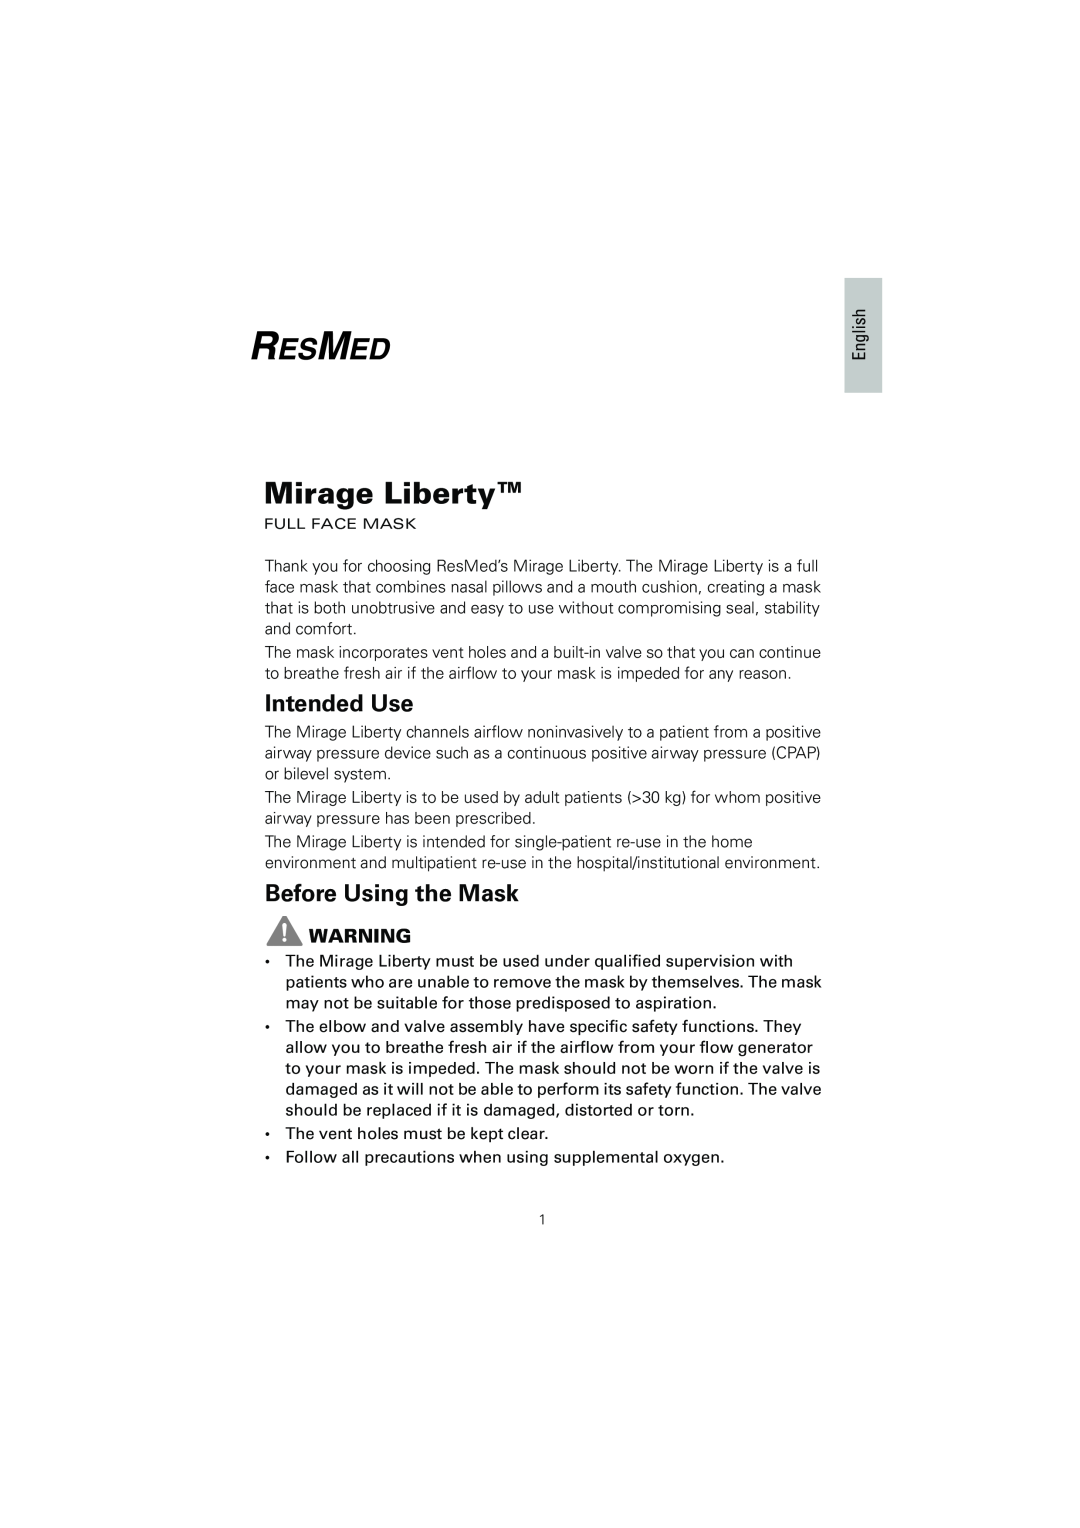 ResMed 61850/2 manual Intended Use, Before Using the Mask, English, Mirage Liberty 